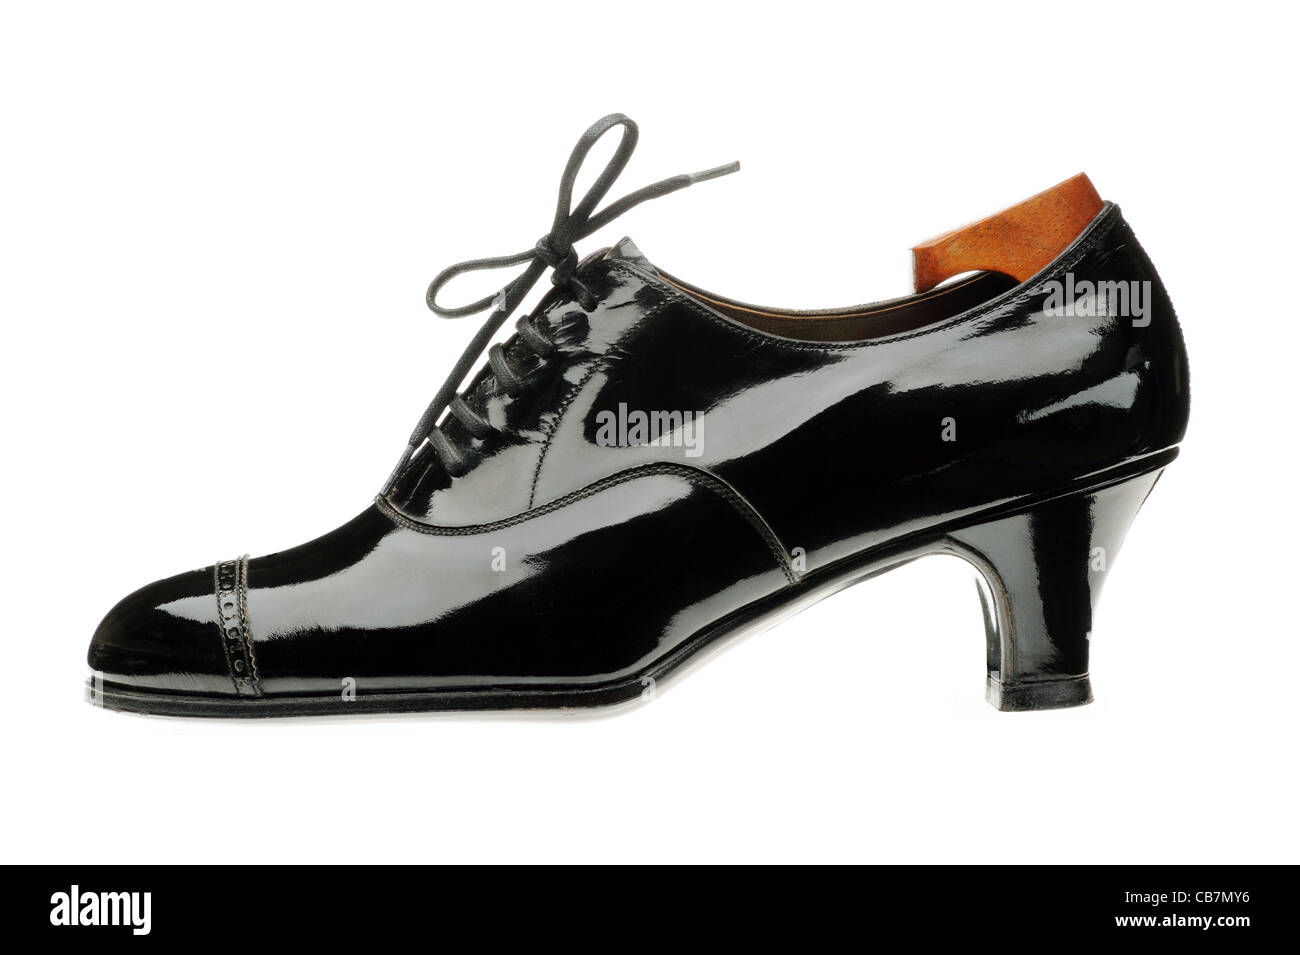 Ladies black patent leather shoe by 